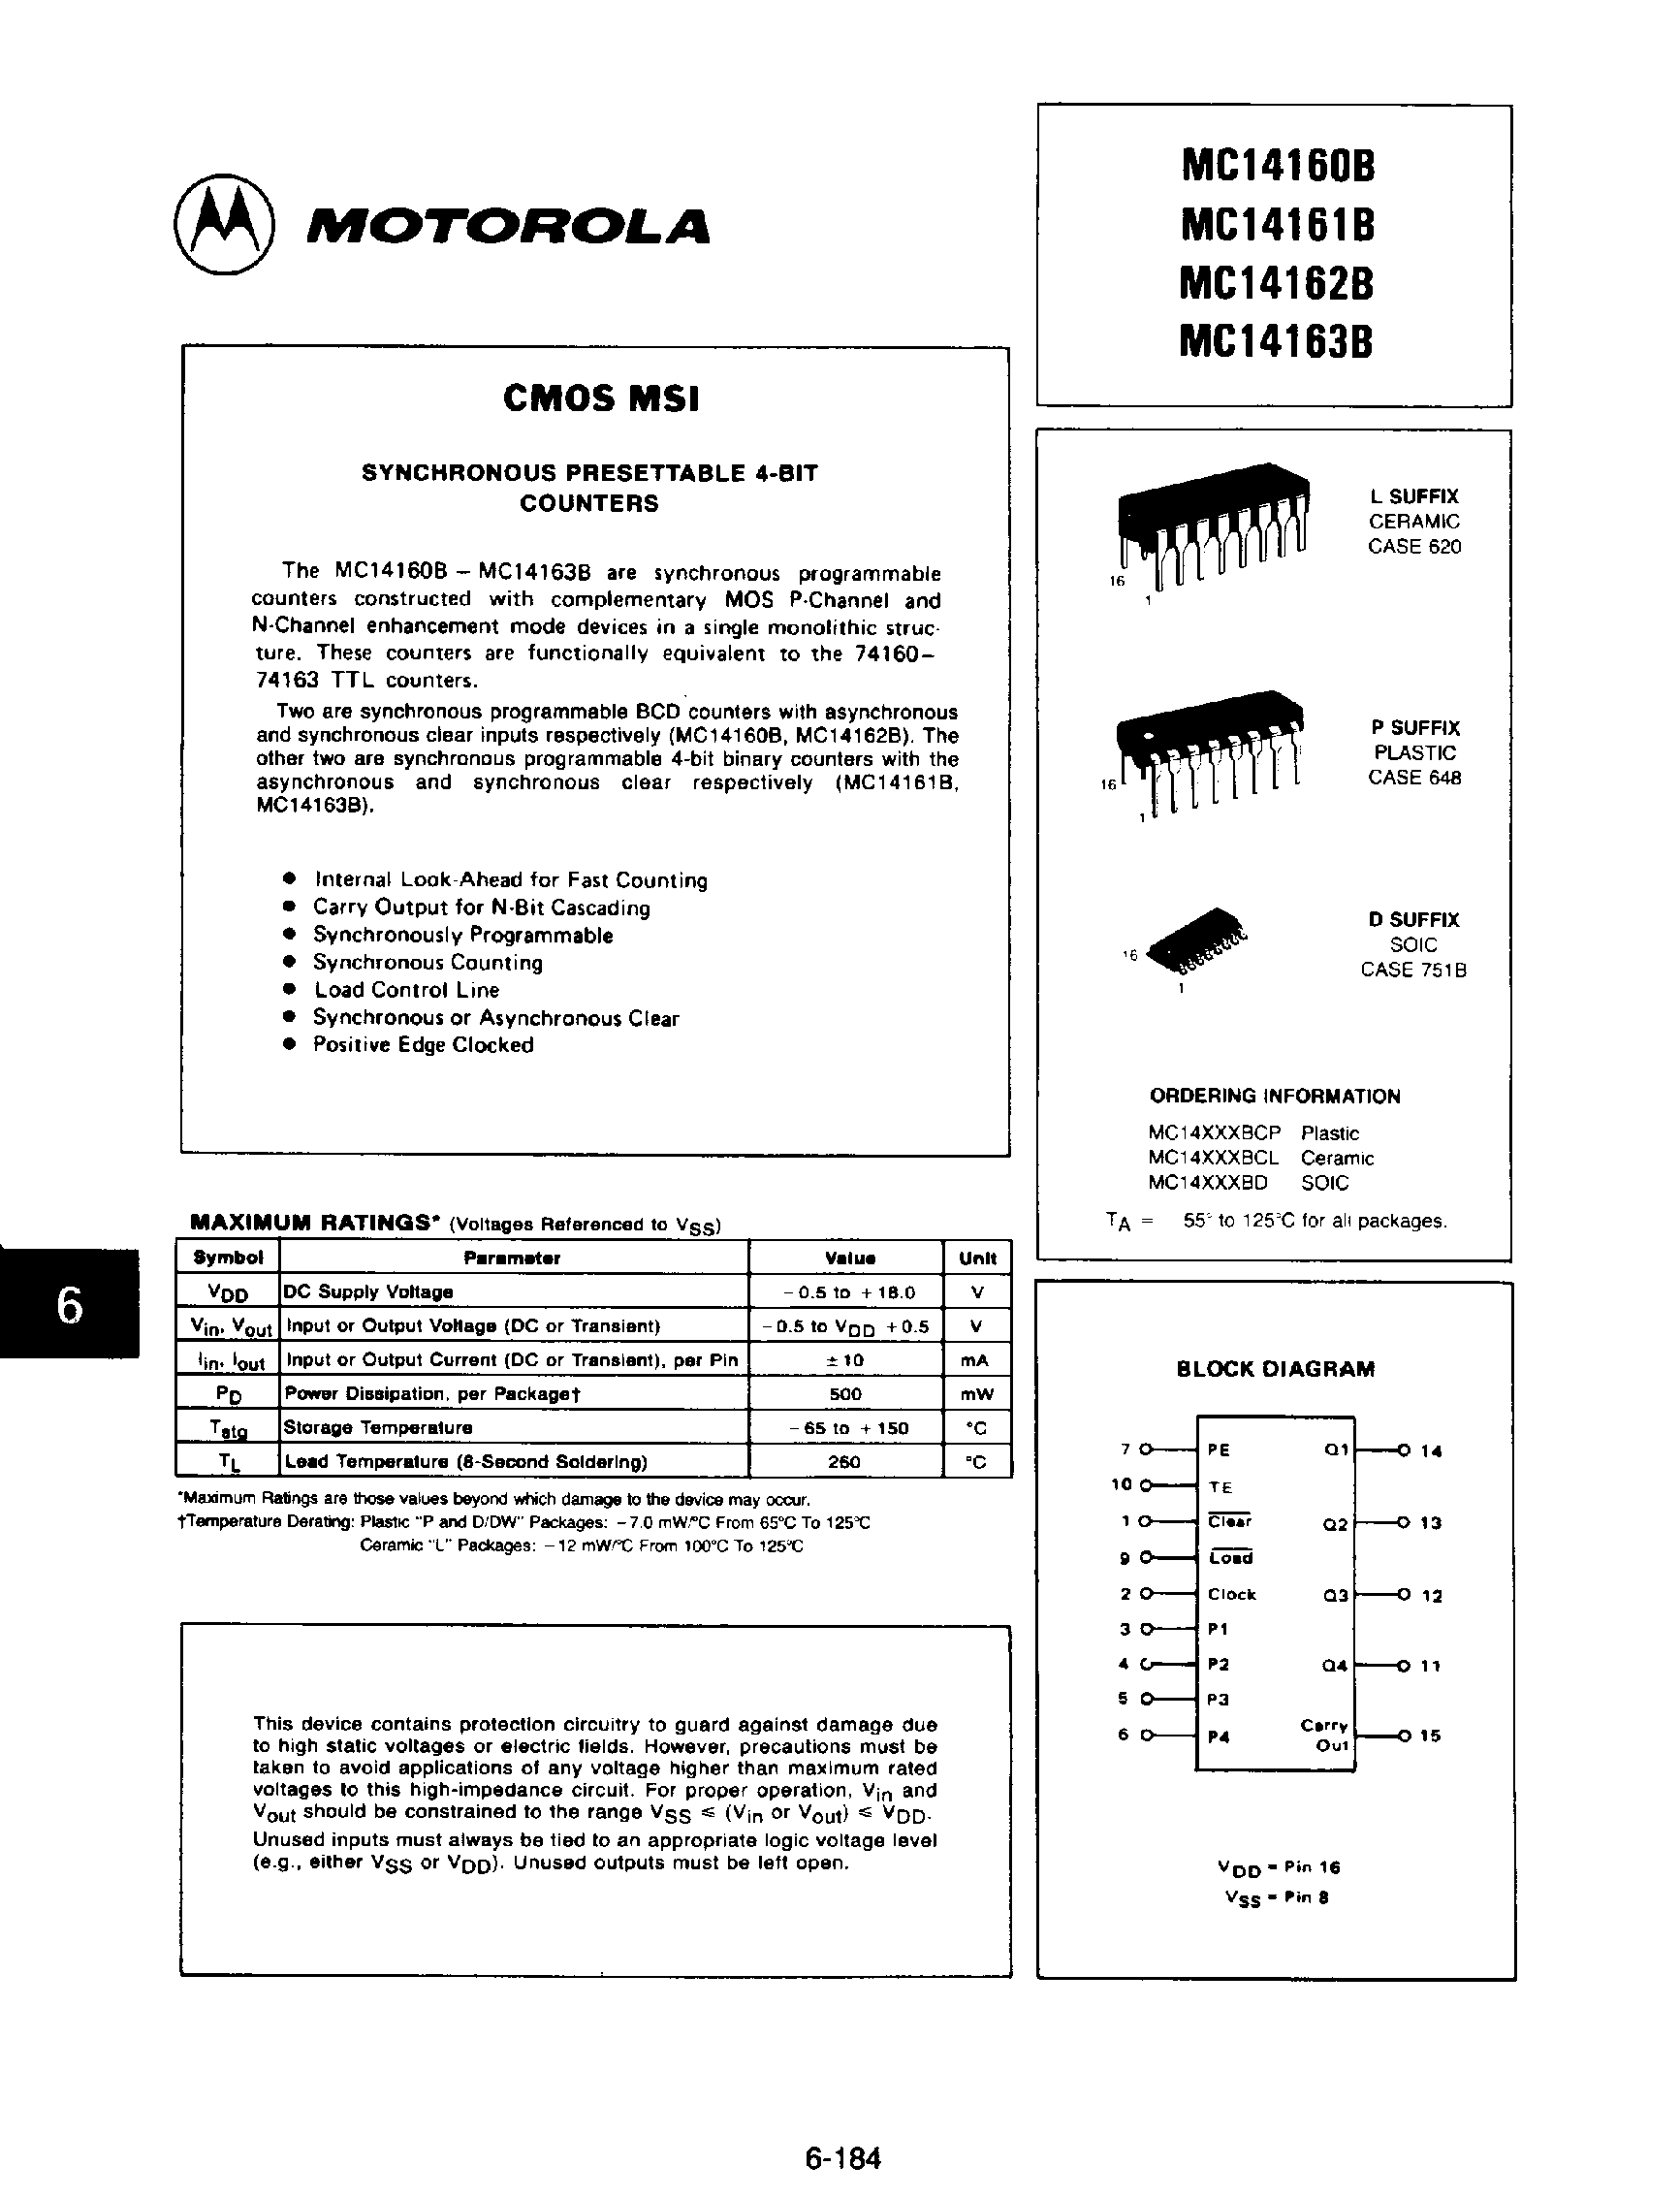 Datasheet MC14163B - Synchronous Presettable 4-Bit Counters page 1